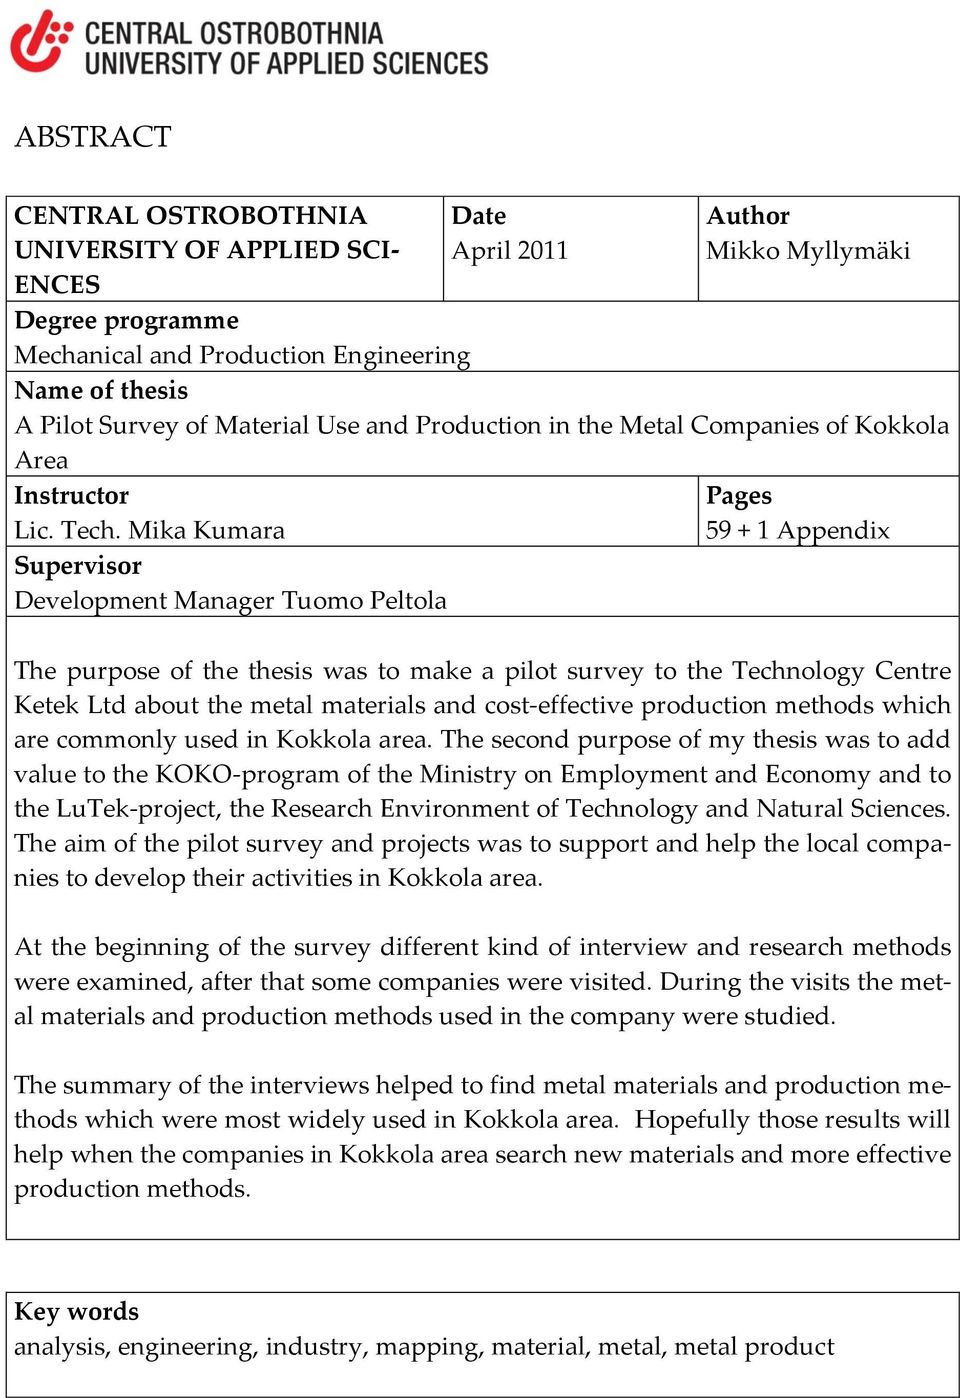 Mika Kumara Supervisor Development Manager Tuomo Peltola Pages 59 + 1 Appendix The purpose of the thesis was to make a pilot survey to the Technology Centre Ketek Ltd about the metal materials and